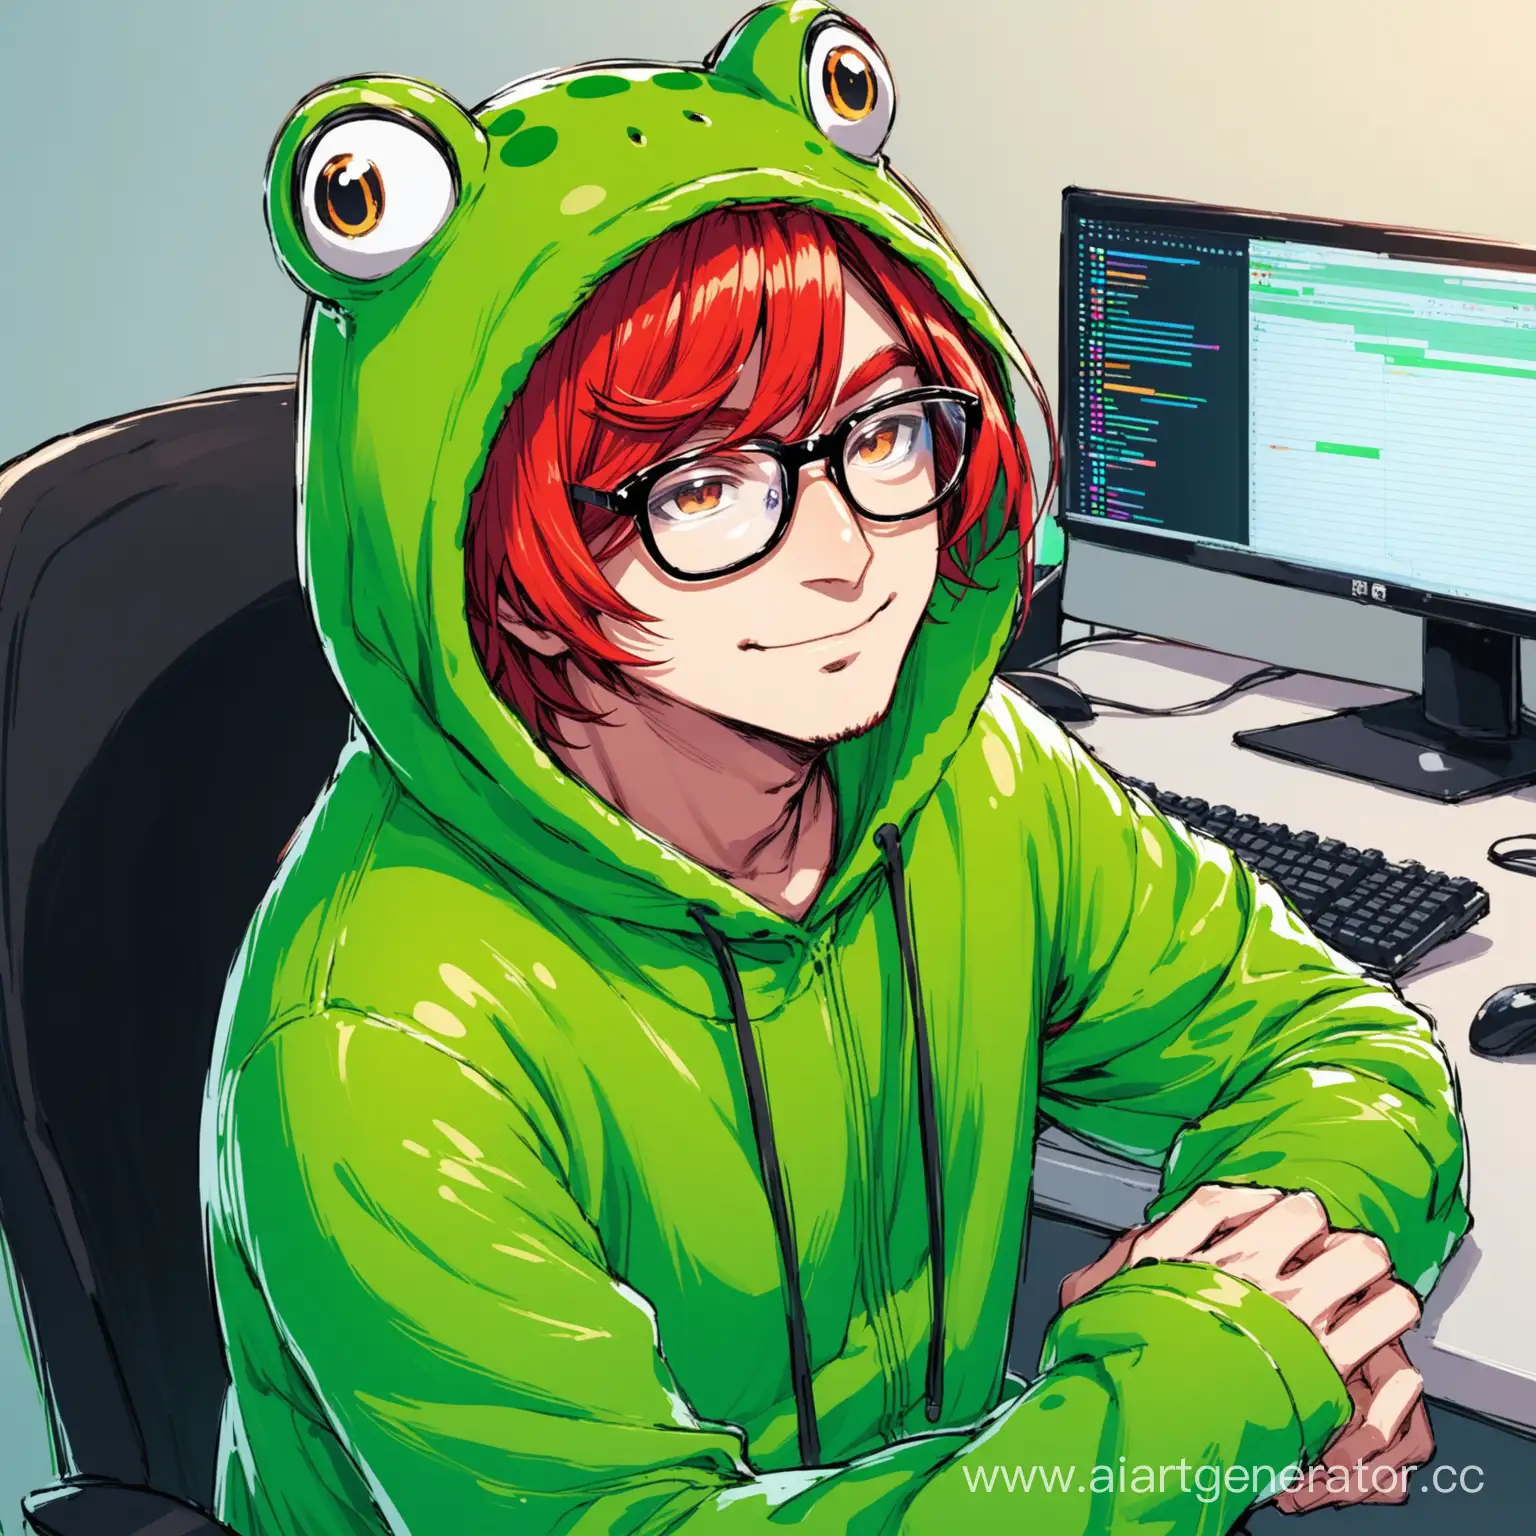 Streamer-in-Frog-Suit-Typing-at-Computer-with-Glasses-and-Red-Hair